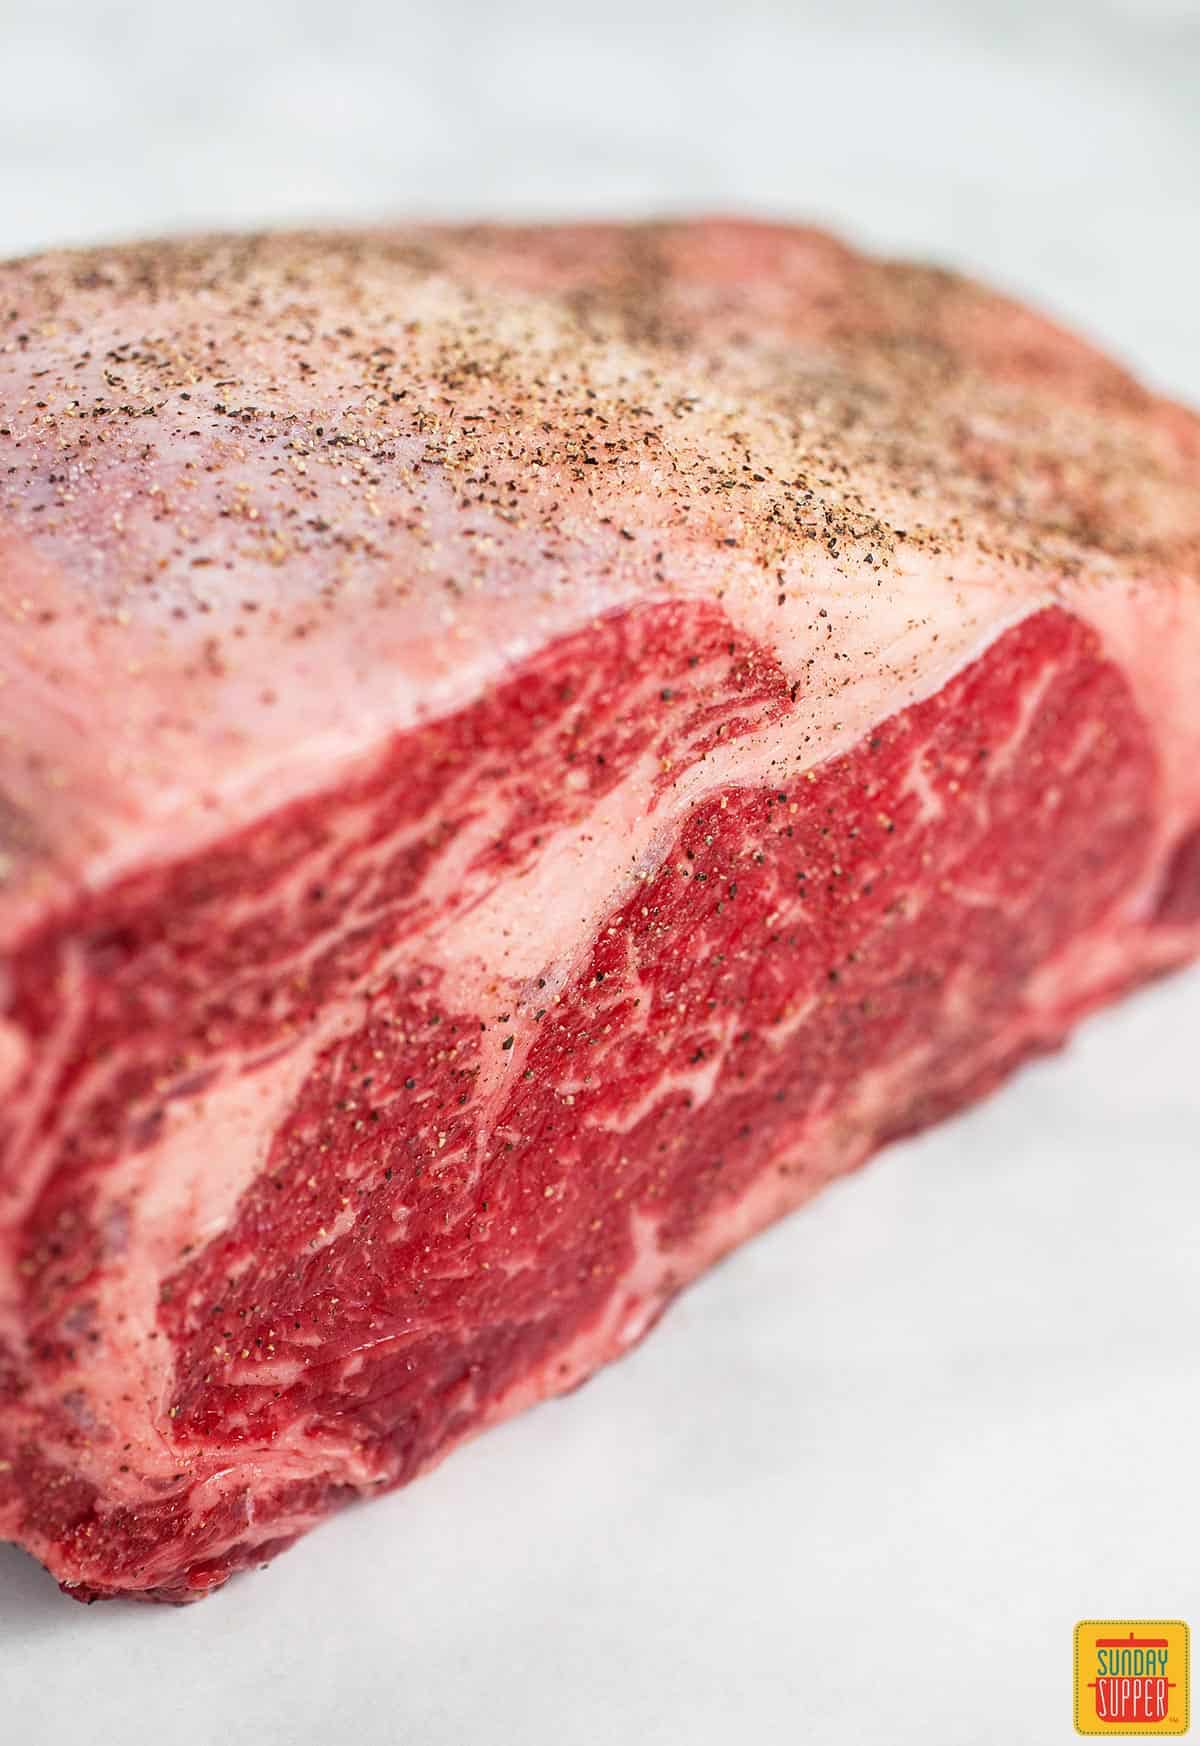 A raw rib roast coated with salt and pepper on a white surface